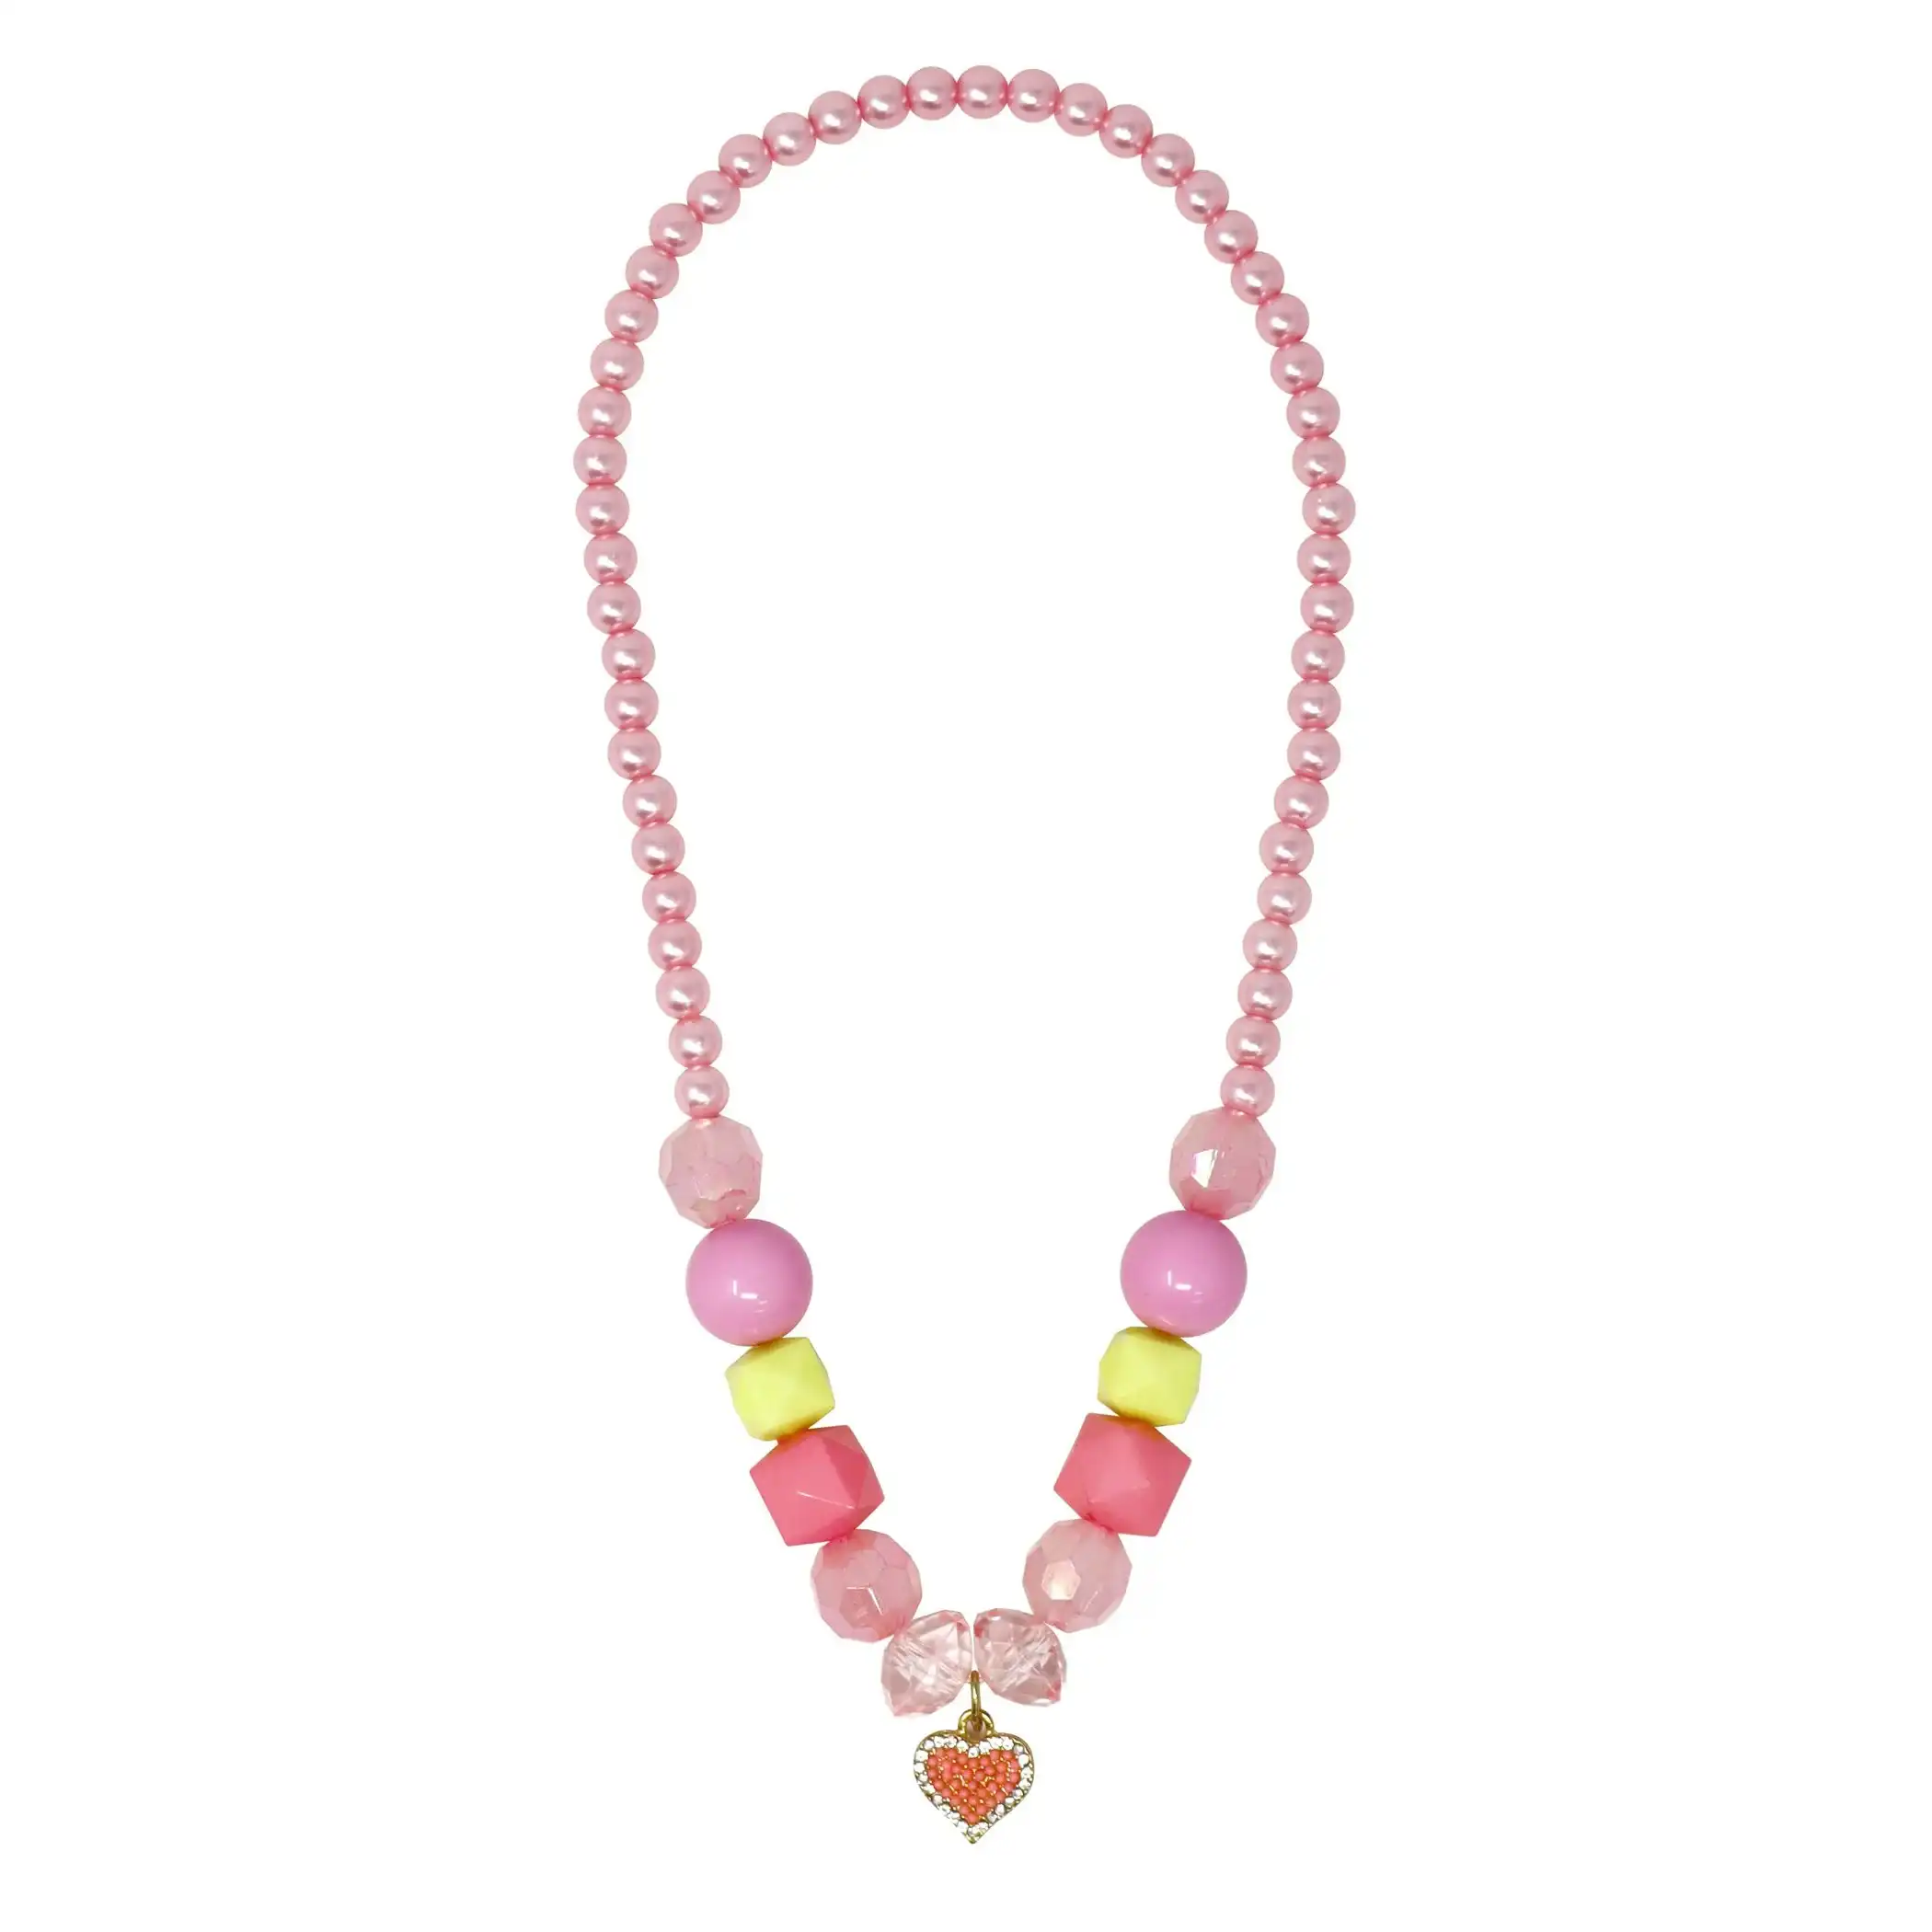 My Lovely Pink Heart Charm Beaded Necklace